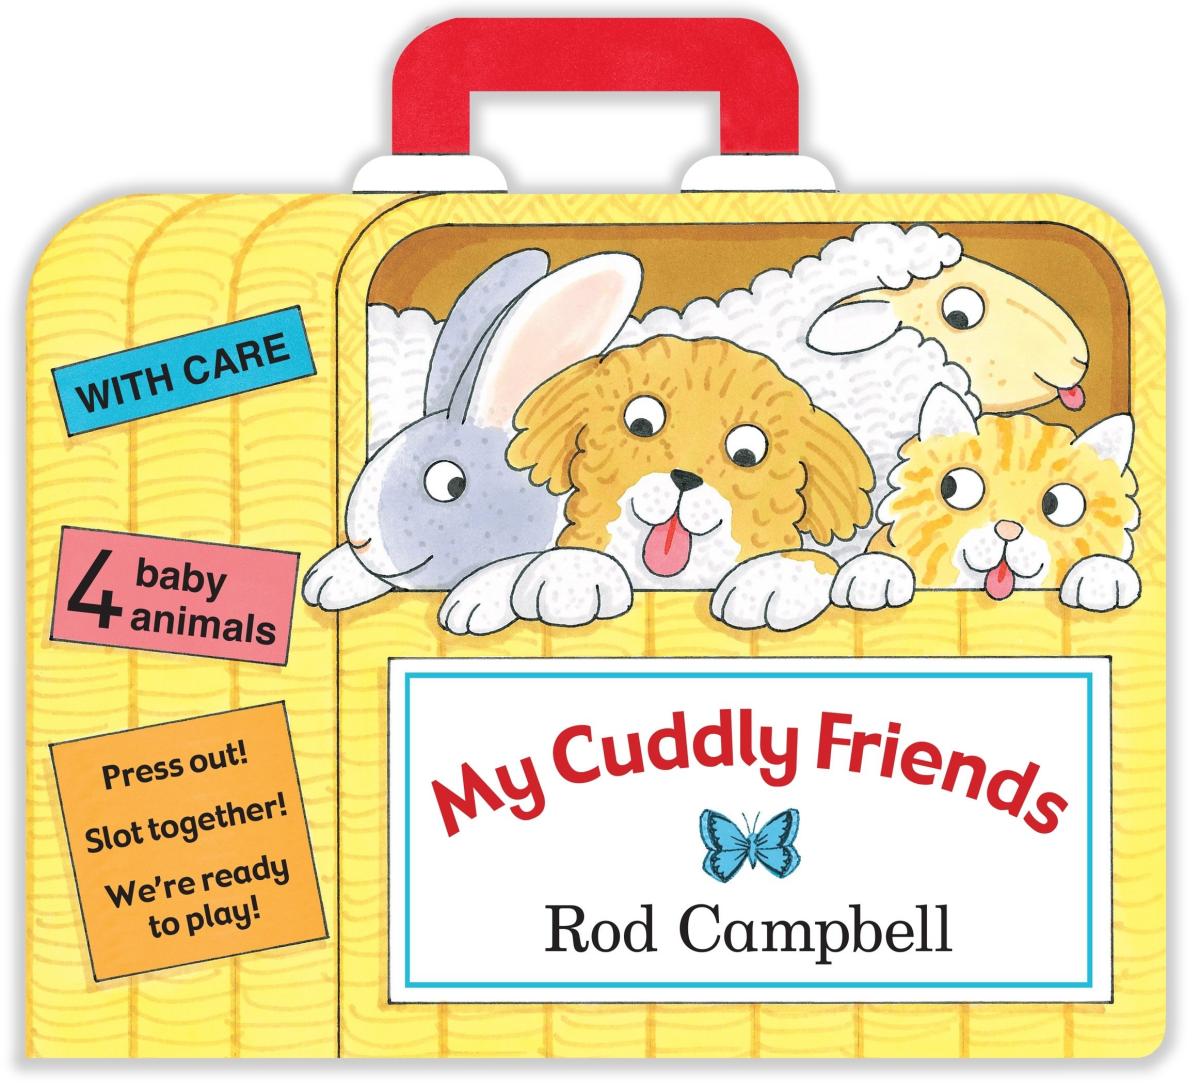 Книга my friends. Campbell friends. Campbell Rod "my presents". Books is my friends. Pressed out